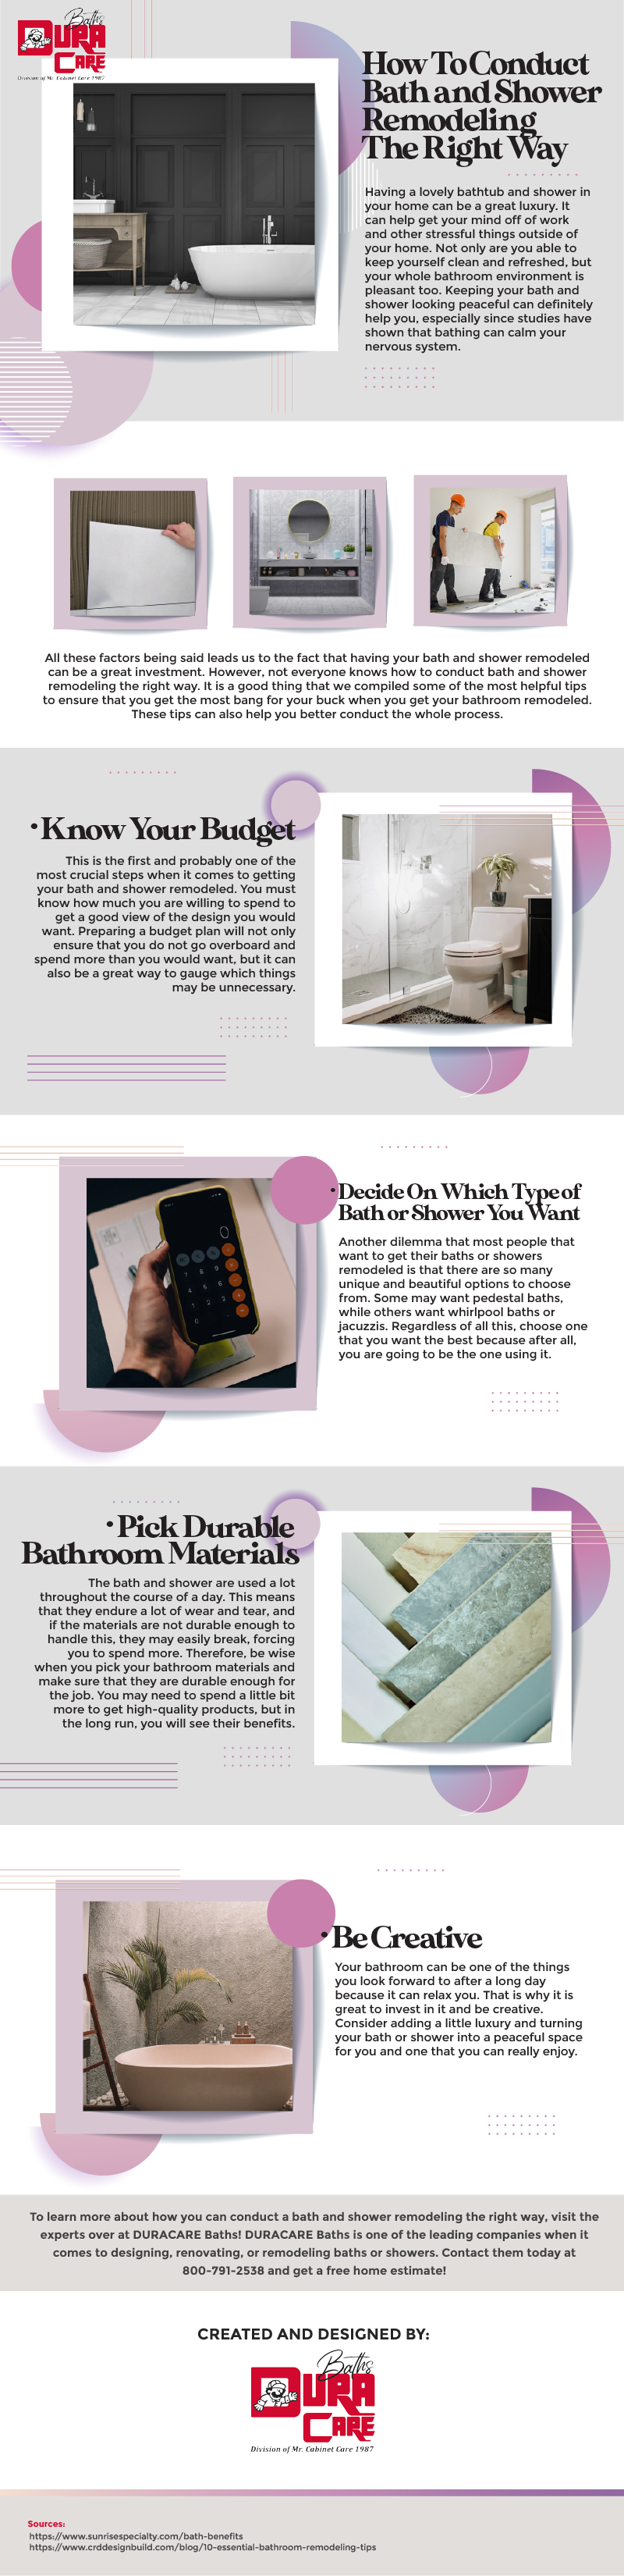 How To Conduct Bath How To Conduct Bath-01 infographic